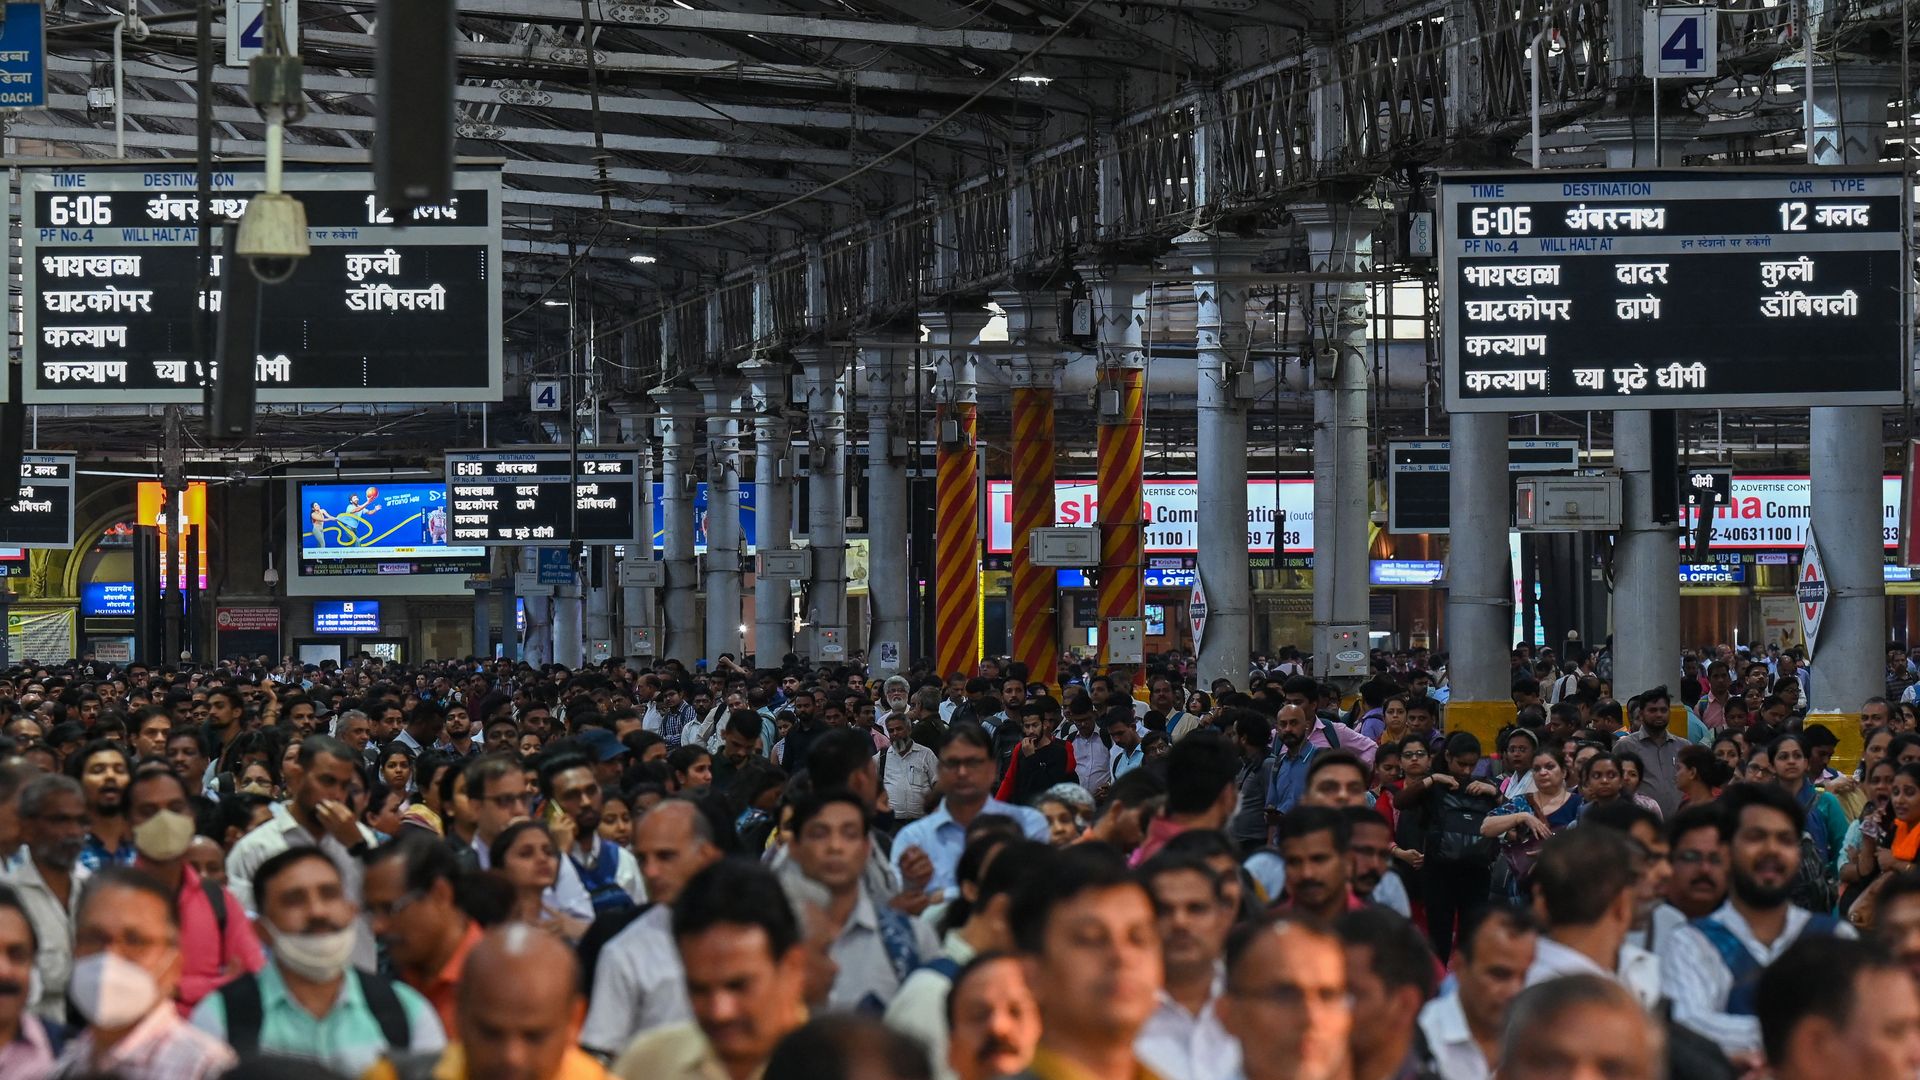 Crowds at a train station in Mumbai, India